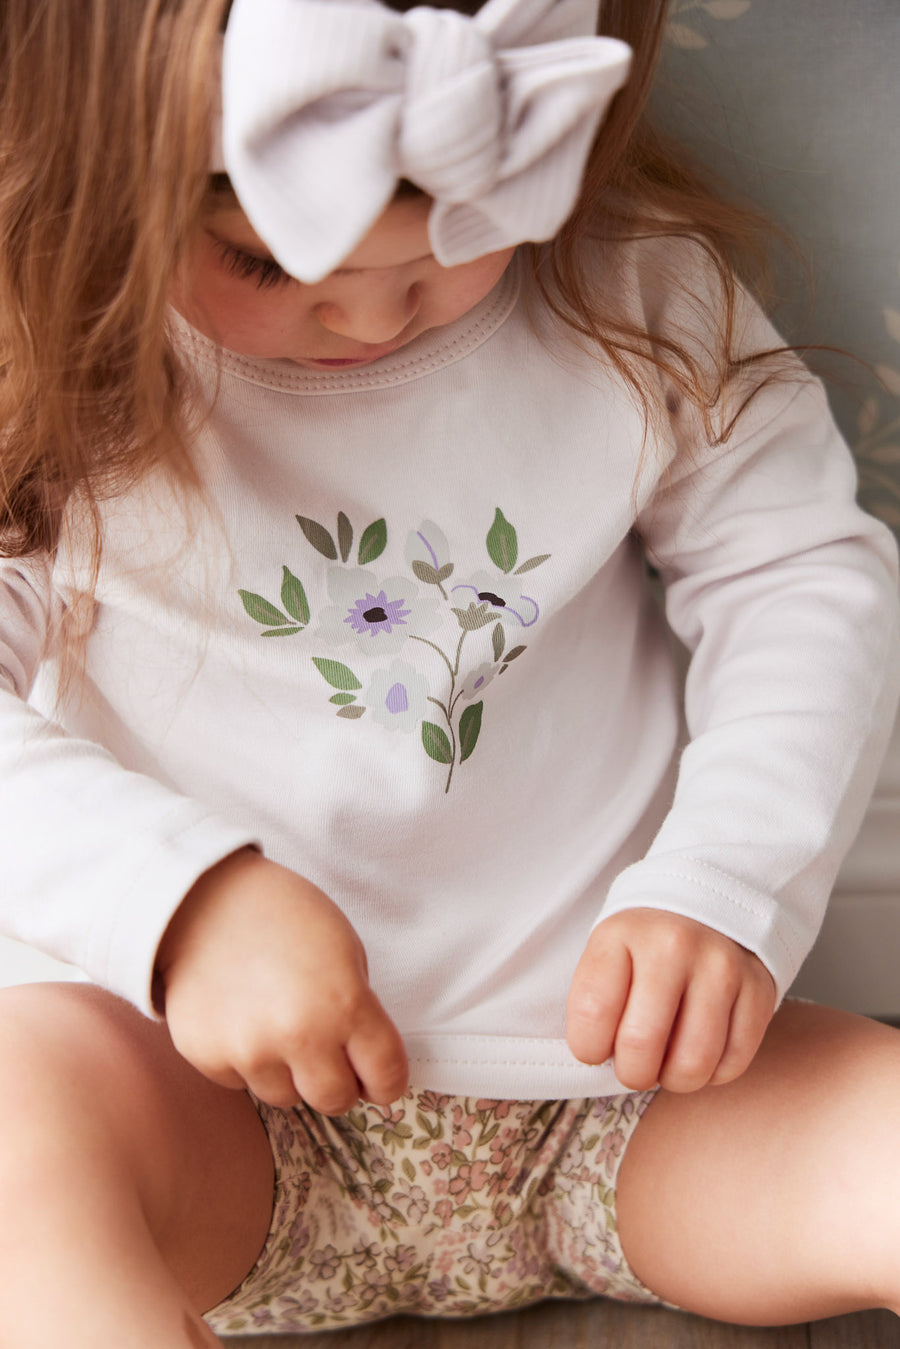 Pima Cotton Marley Long Sleeve Top - Luna Childrens Top from Jamie Kay NZ